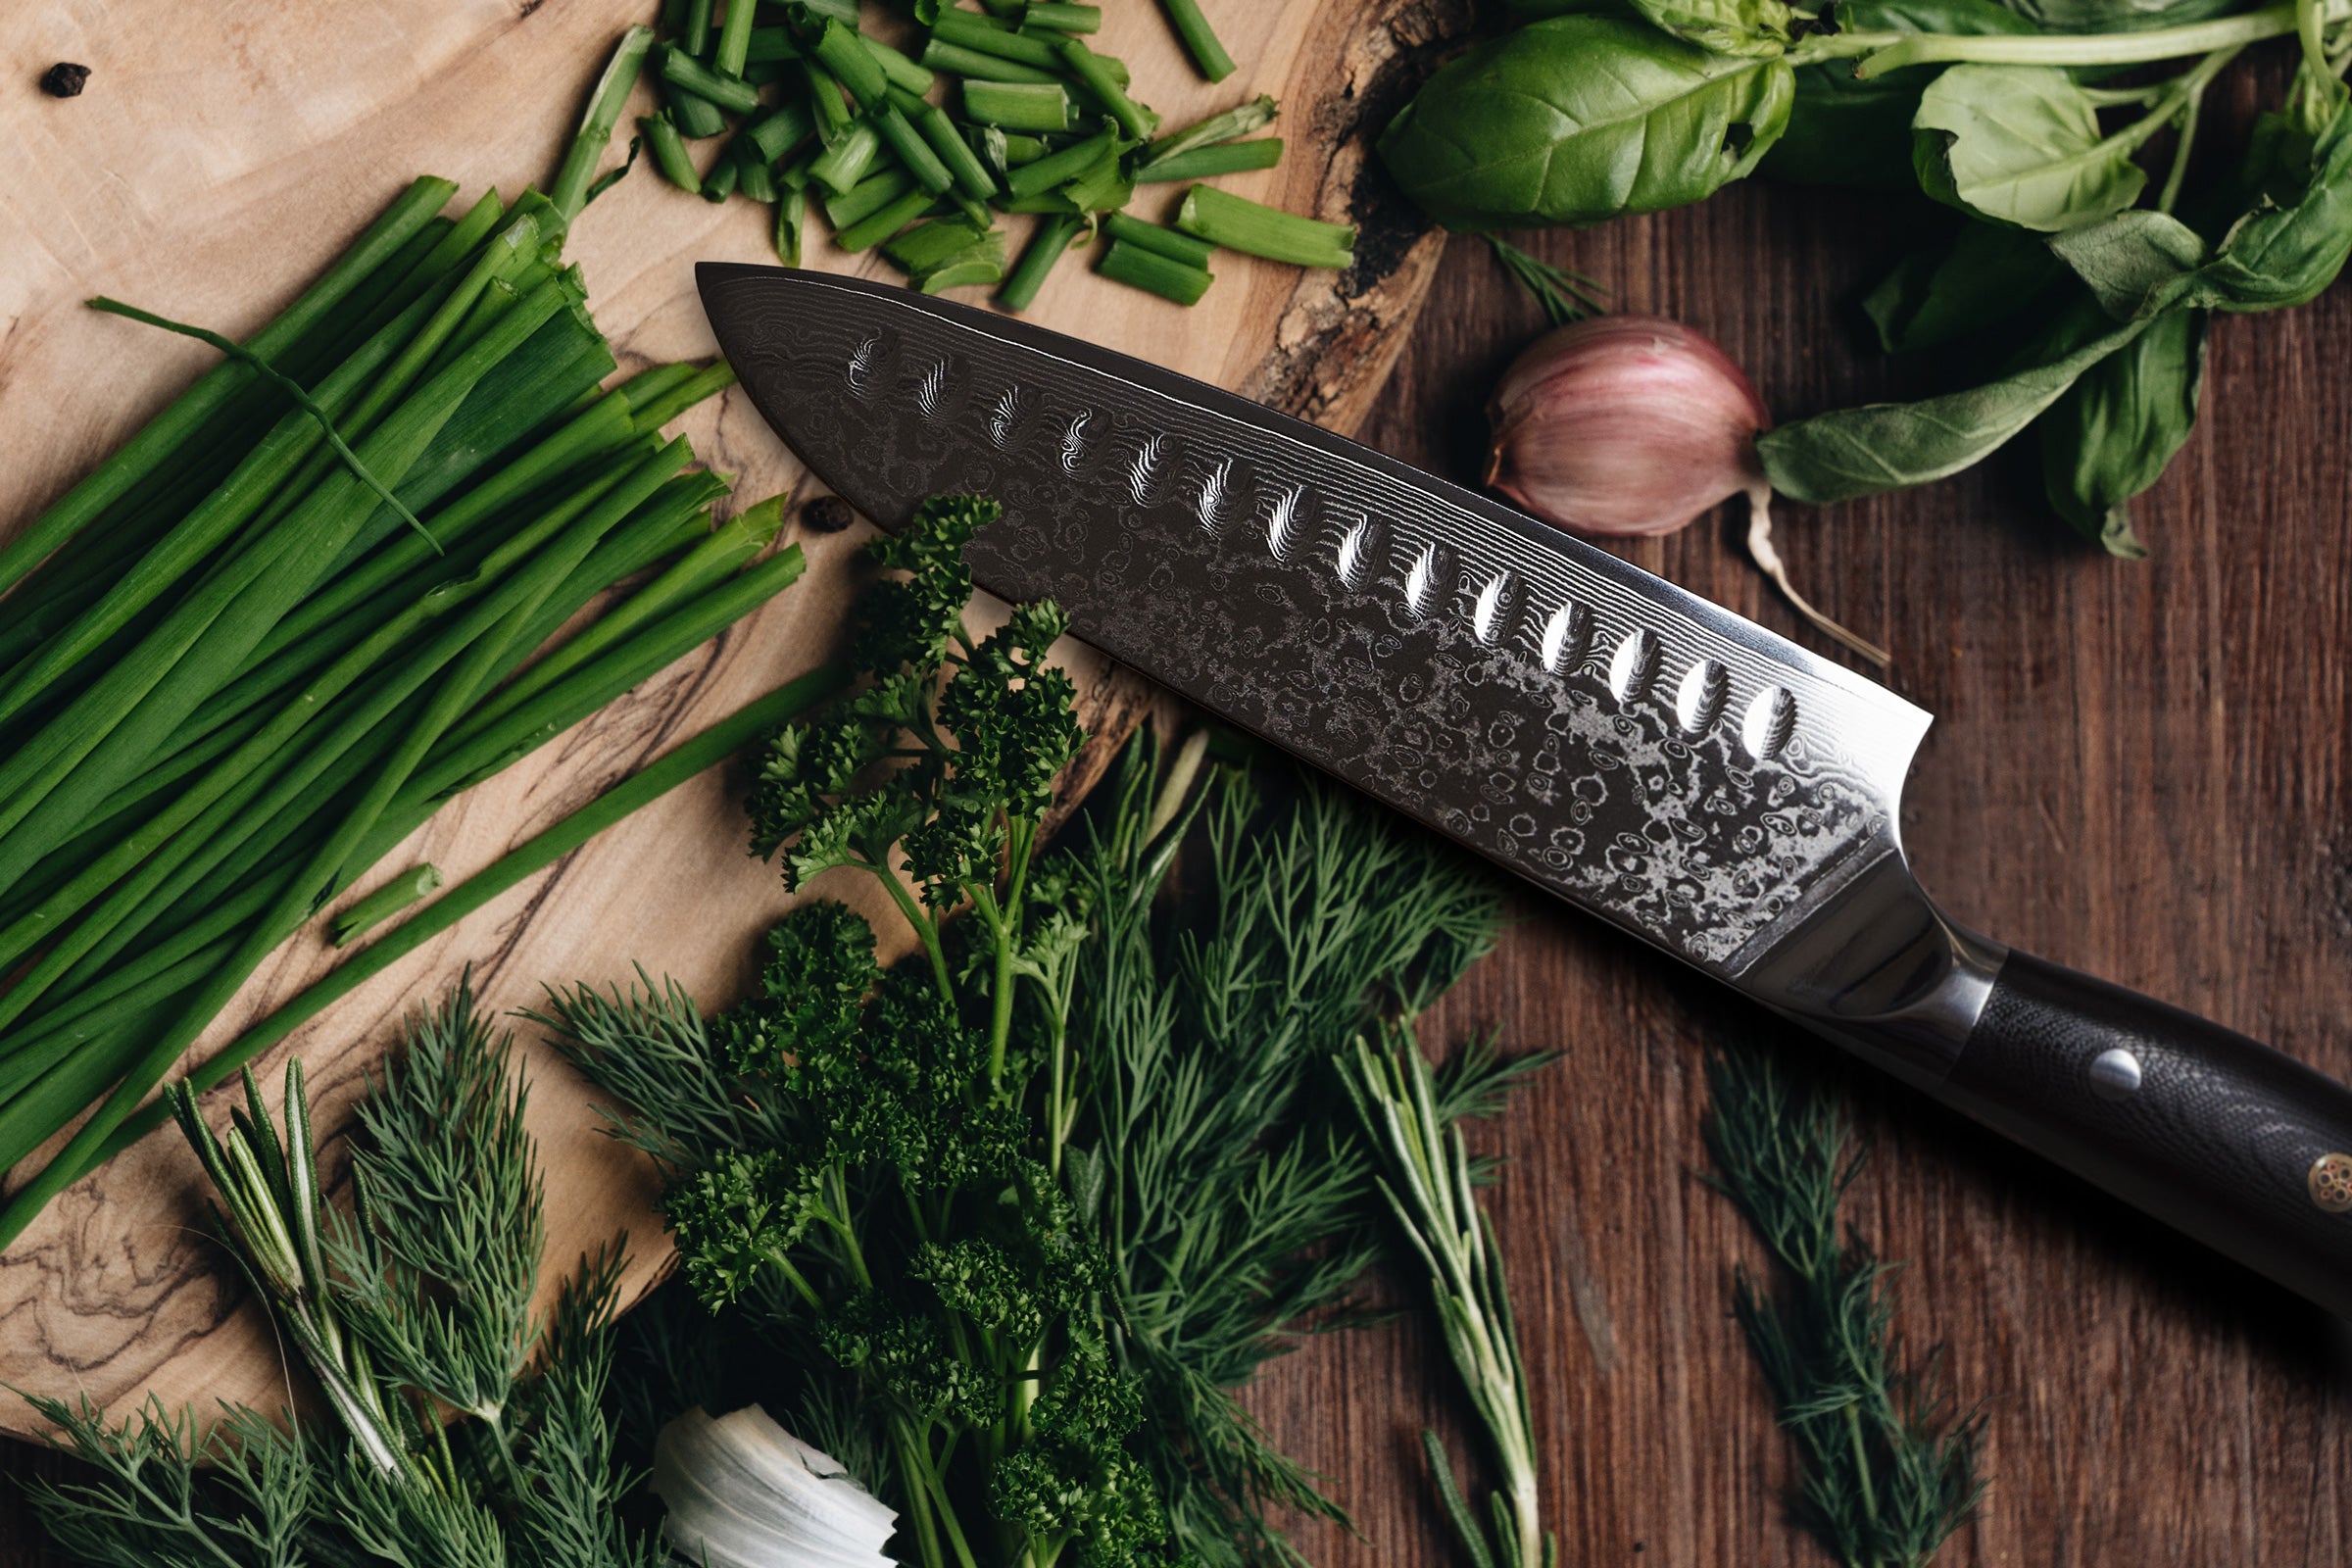 The Dynasty Damascus Santoku after dicing green onions.